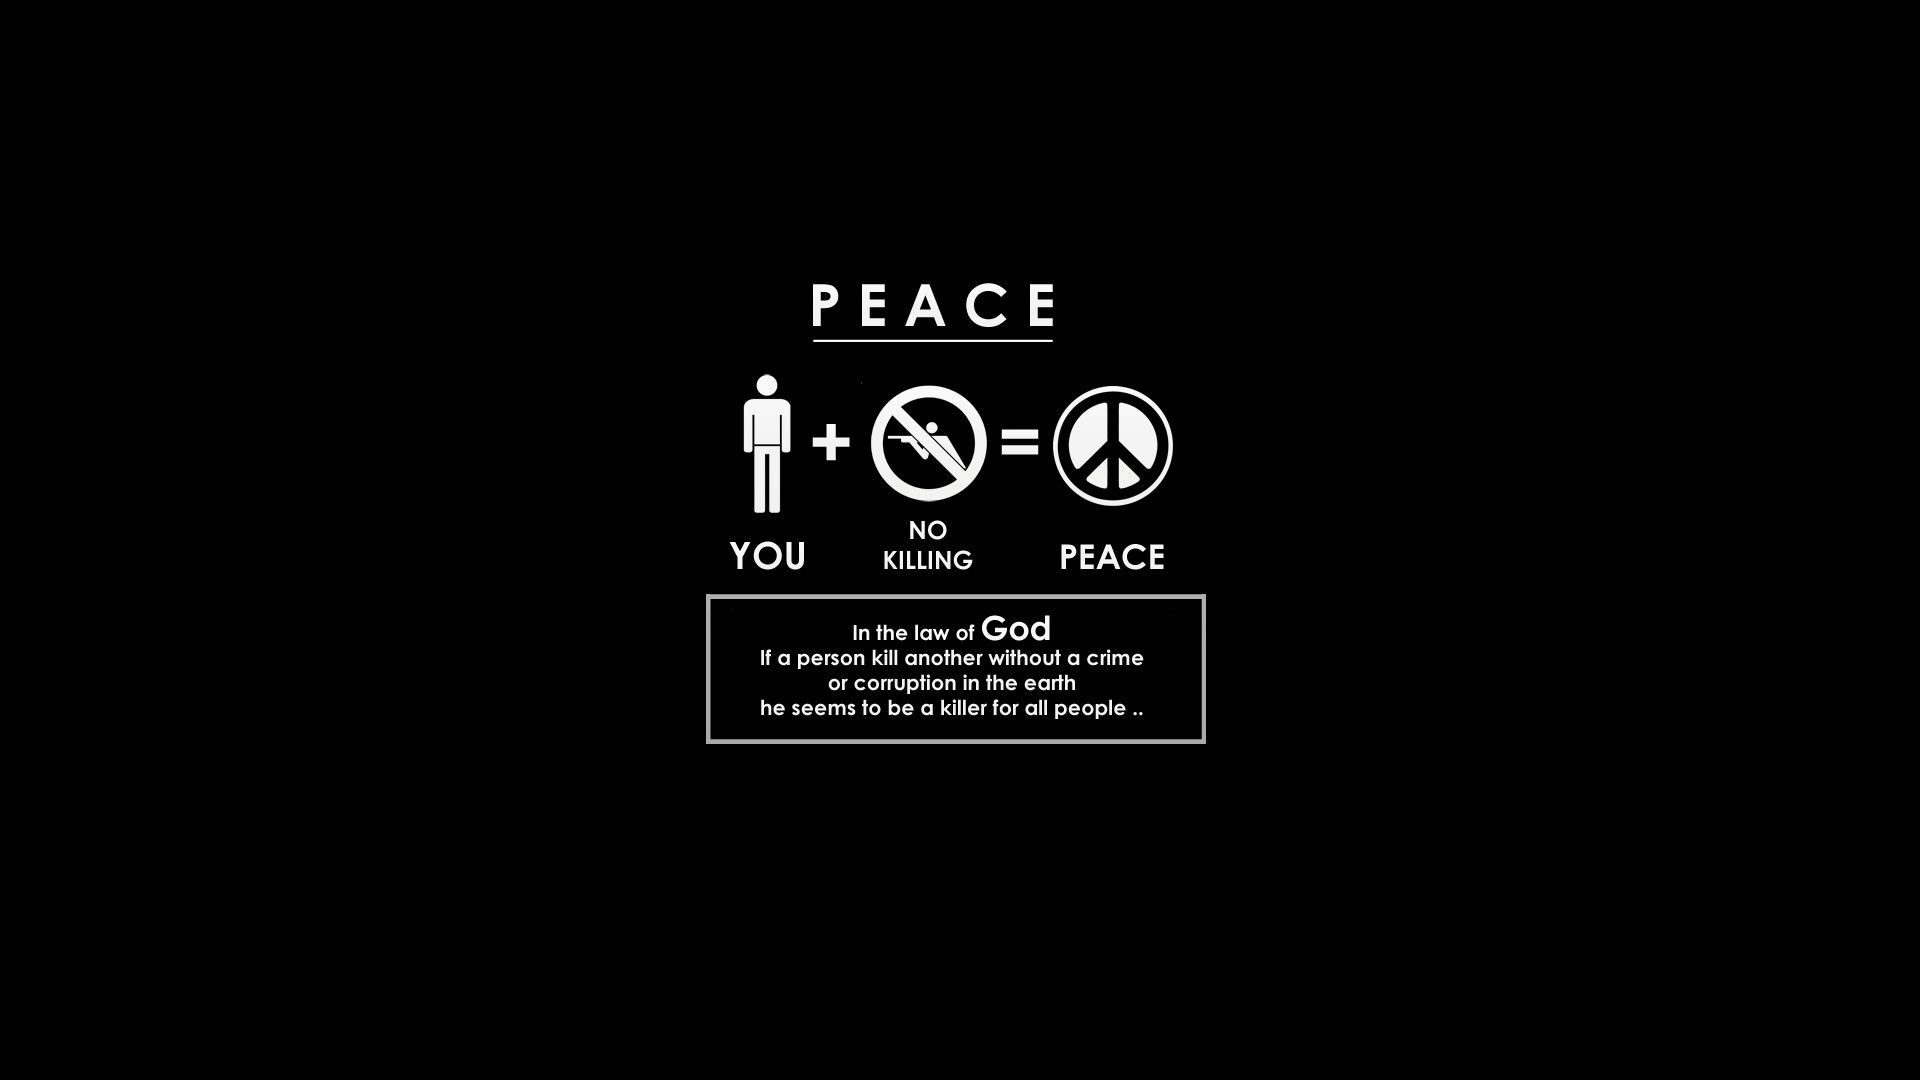 PK64 HDQ Peace Picture (Mobile, PC, iPhone and more)